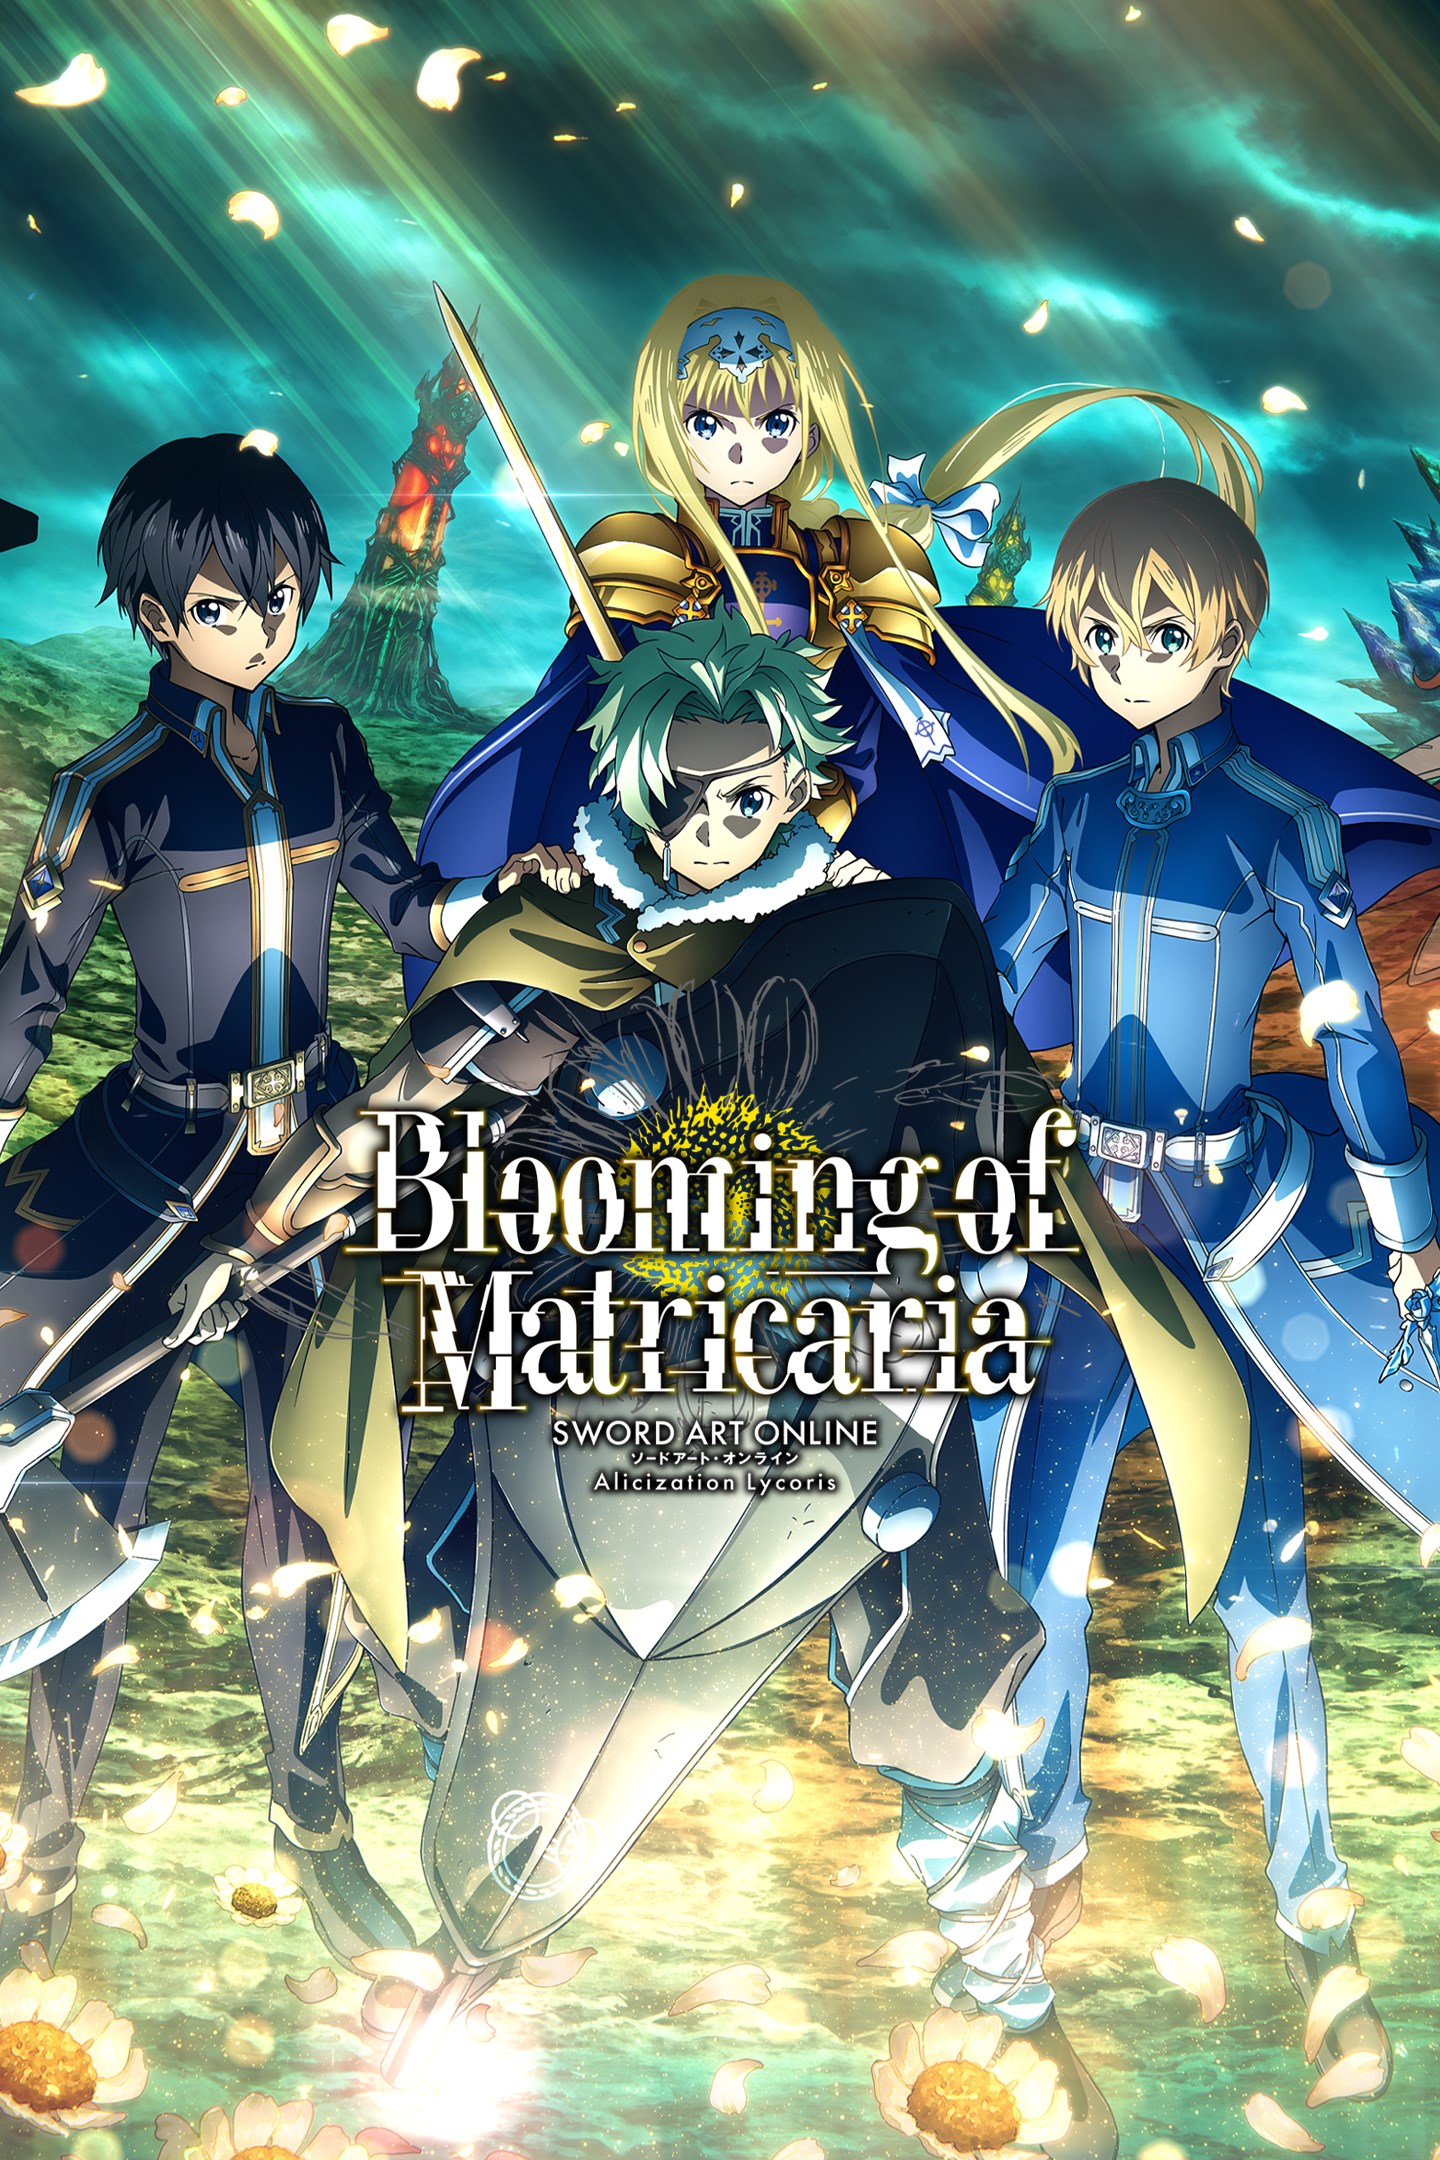 Blooming of Matricaria is the second major expansion DLC for SWORD ART ONLI...